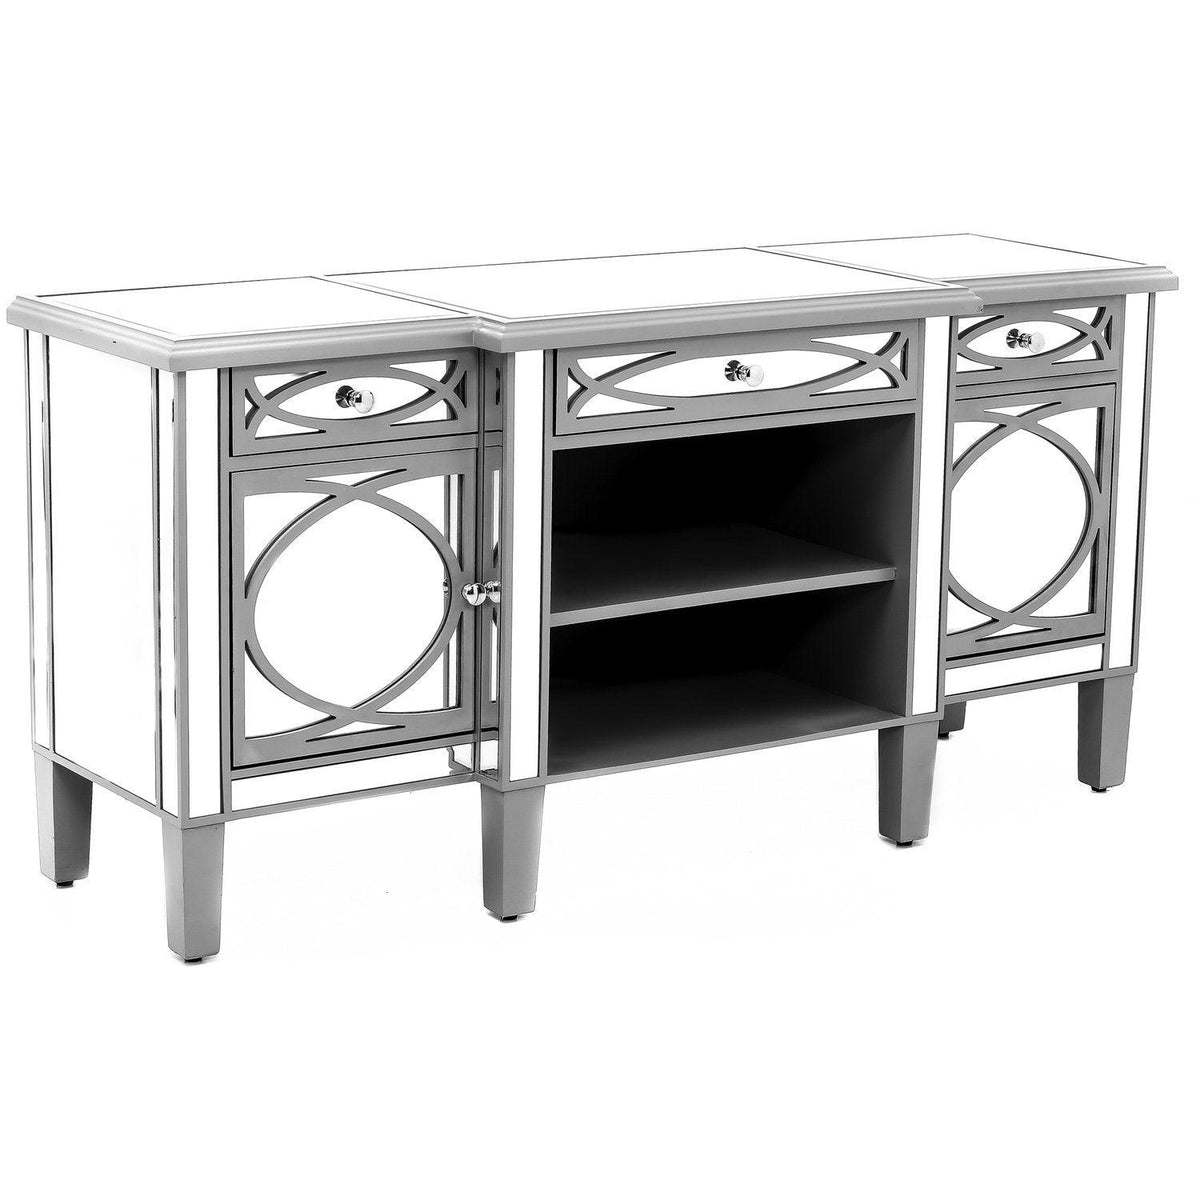 Paloma Collection Mirrored Media Unit - Vookoo Lifestyle